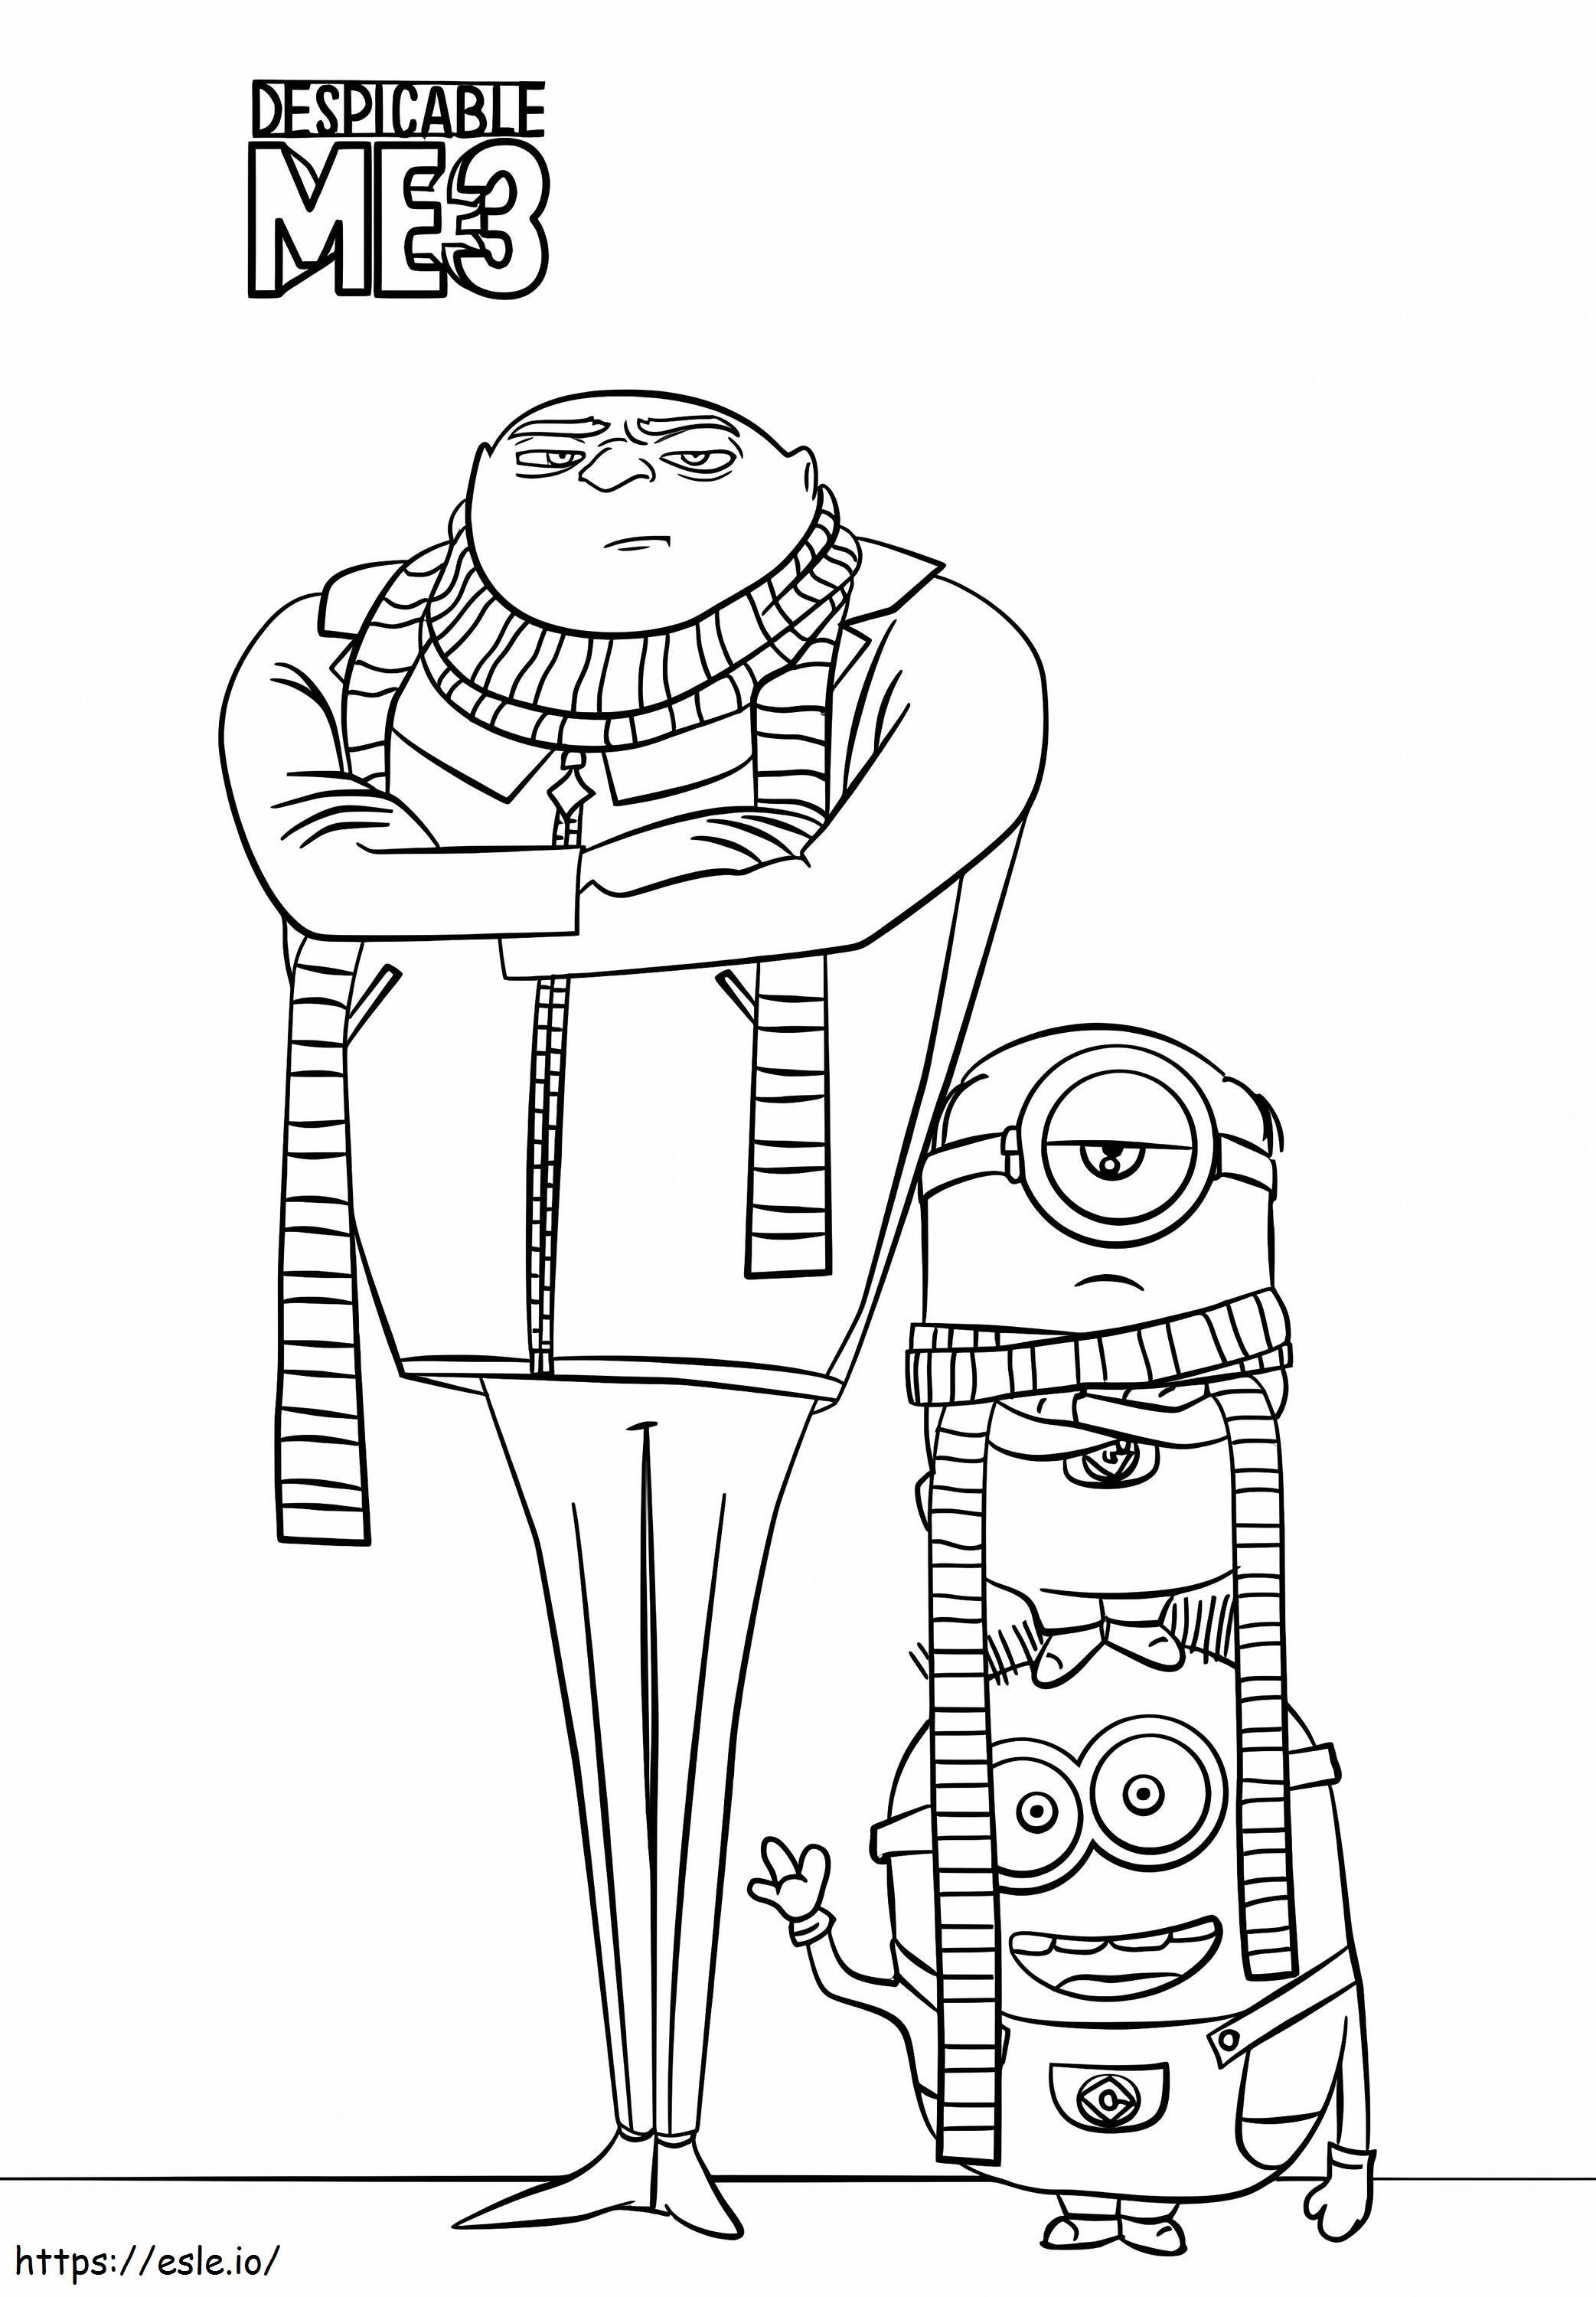 gru-and-minions-from-despicable-me-3-coloring-page